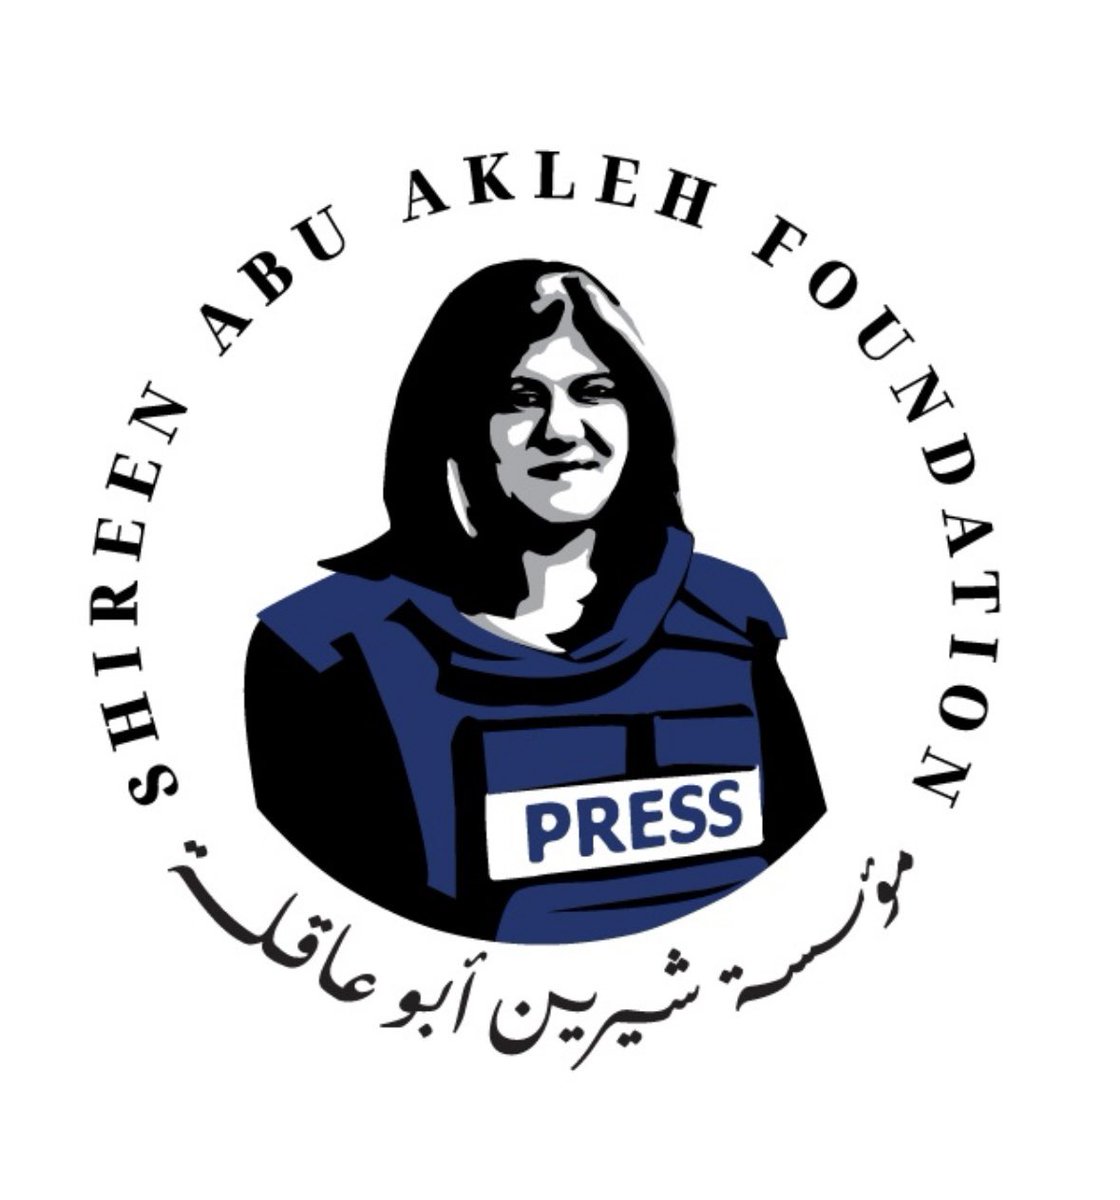 As we mark two years since the killing of #ShireenAbuAkleh, her family established a foundation to preserve her legacy. It aims to help future journalists globally through scholarships. Join us in this cause; your support can shape the future of journalism.donorbox.org/justice-for-sh…